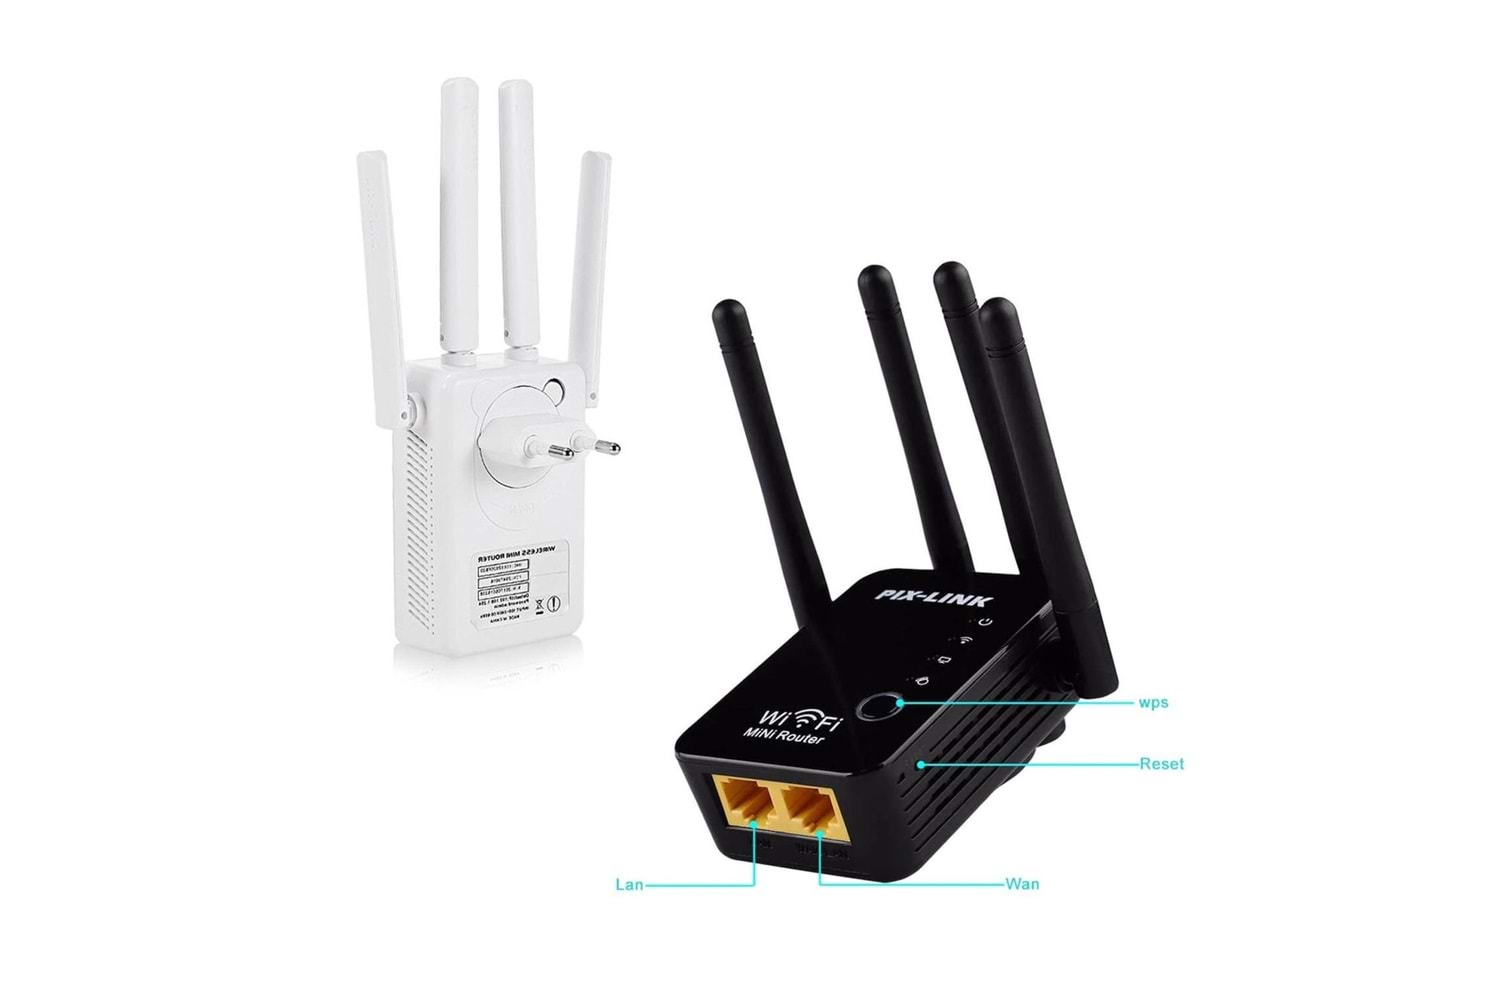 GABBLE GAB-APR400 4 ANTEN ACCESS POINT REPEATER ROUTER 300MBPS